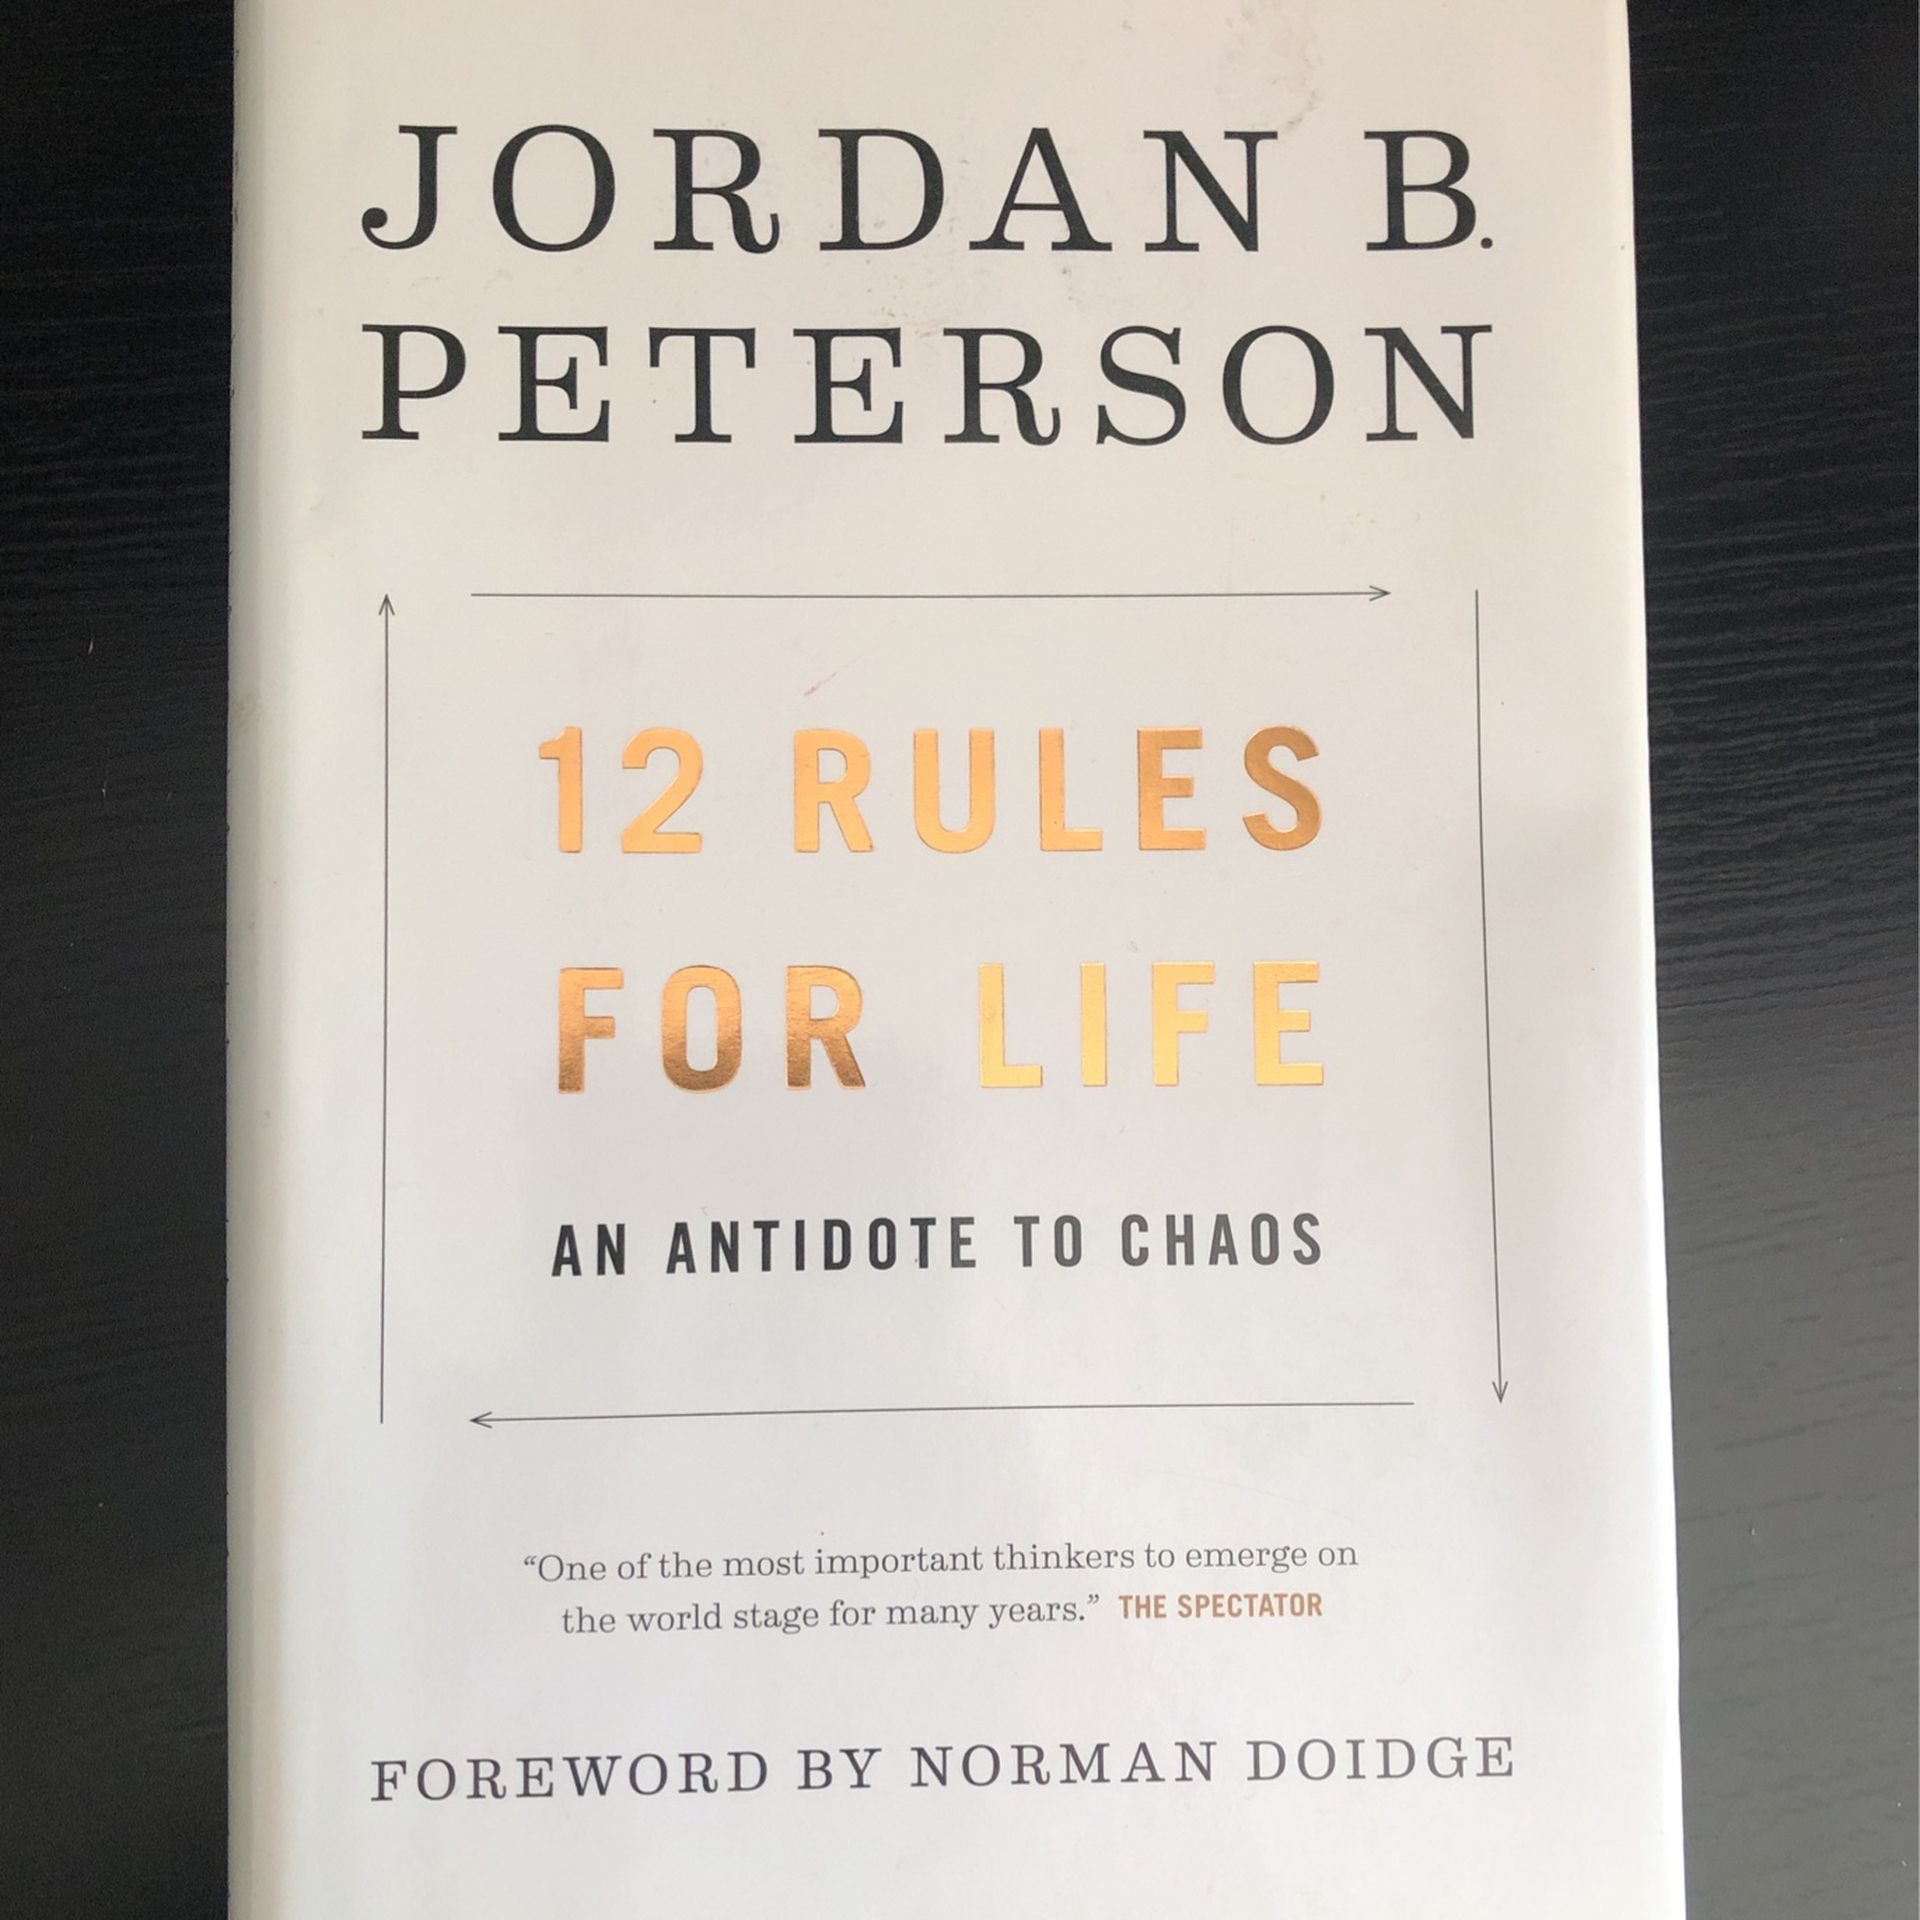 Jordan B. Peterson “12 rules for life and antidote to chaos”